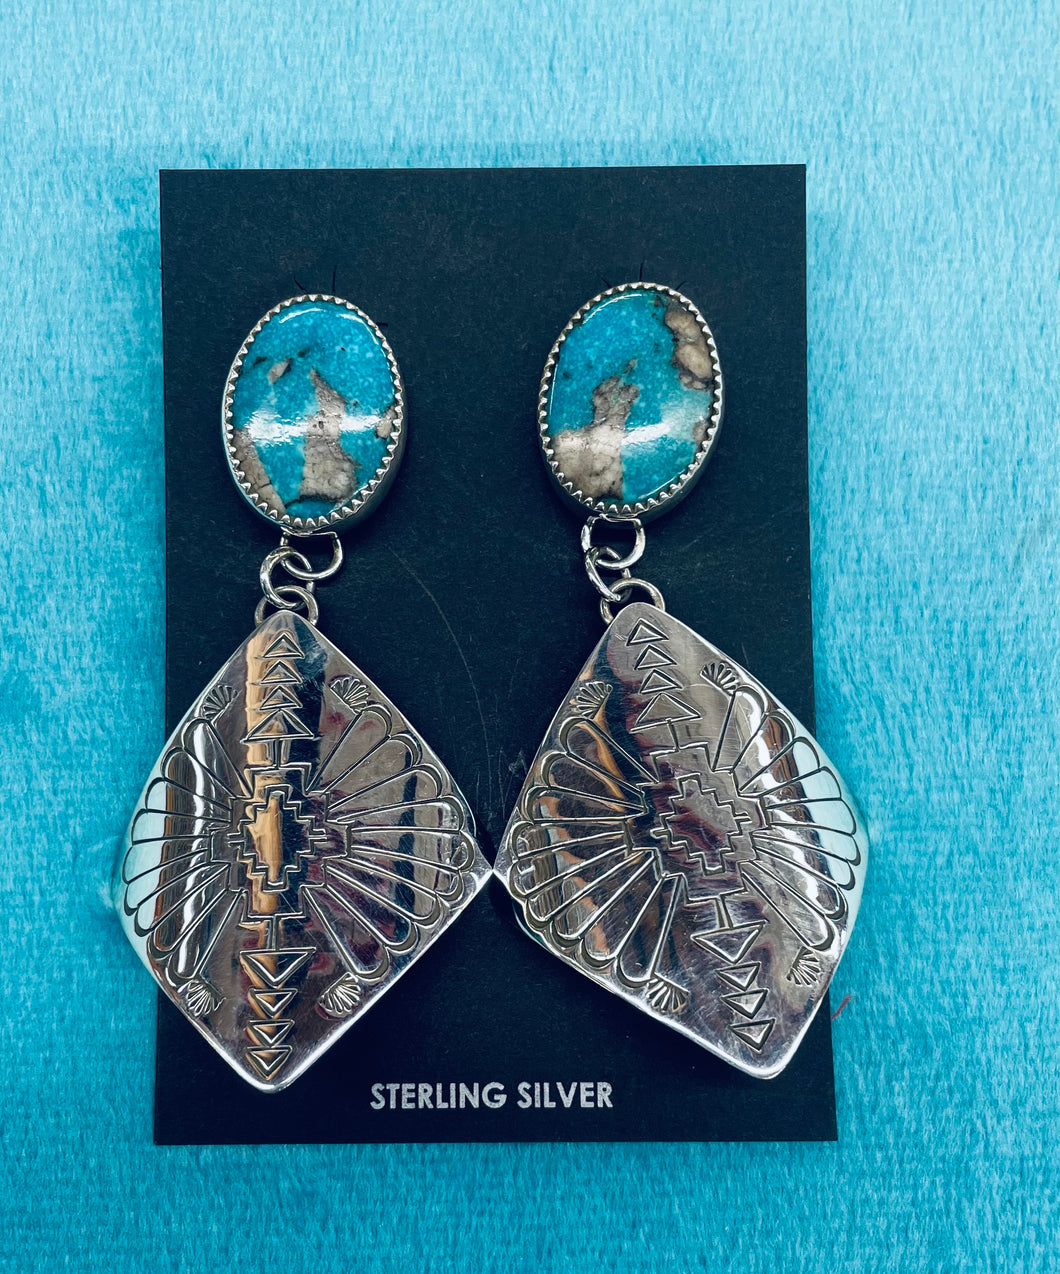 Sterling Silver with Turquoise Earrings